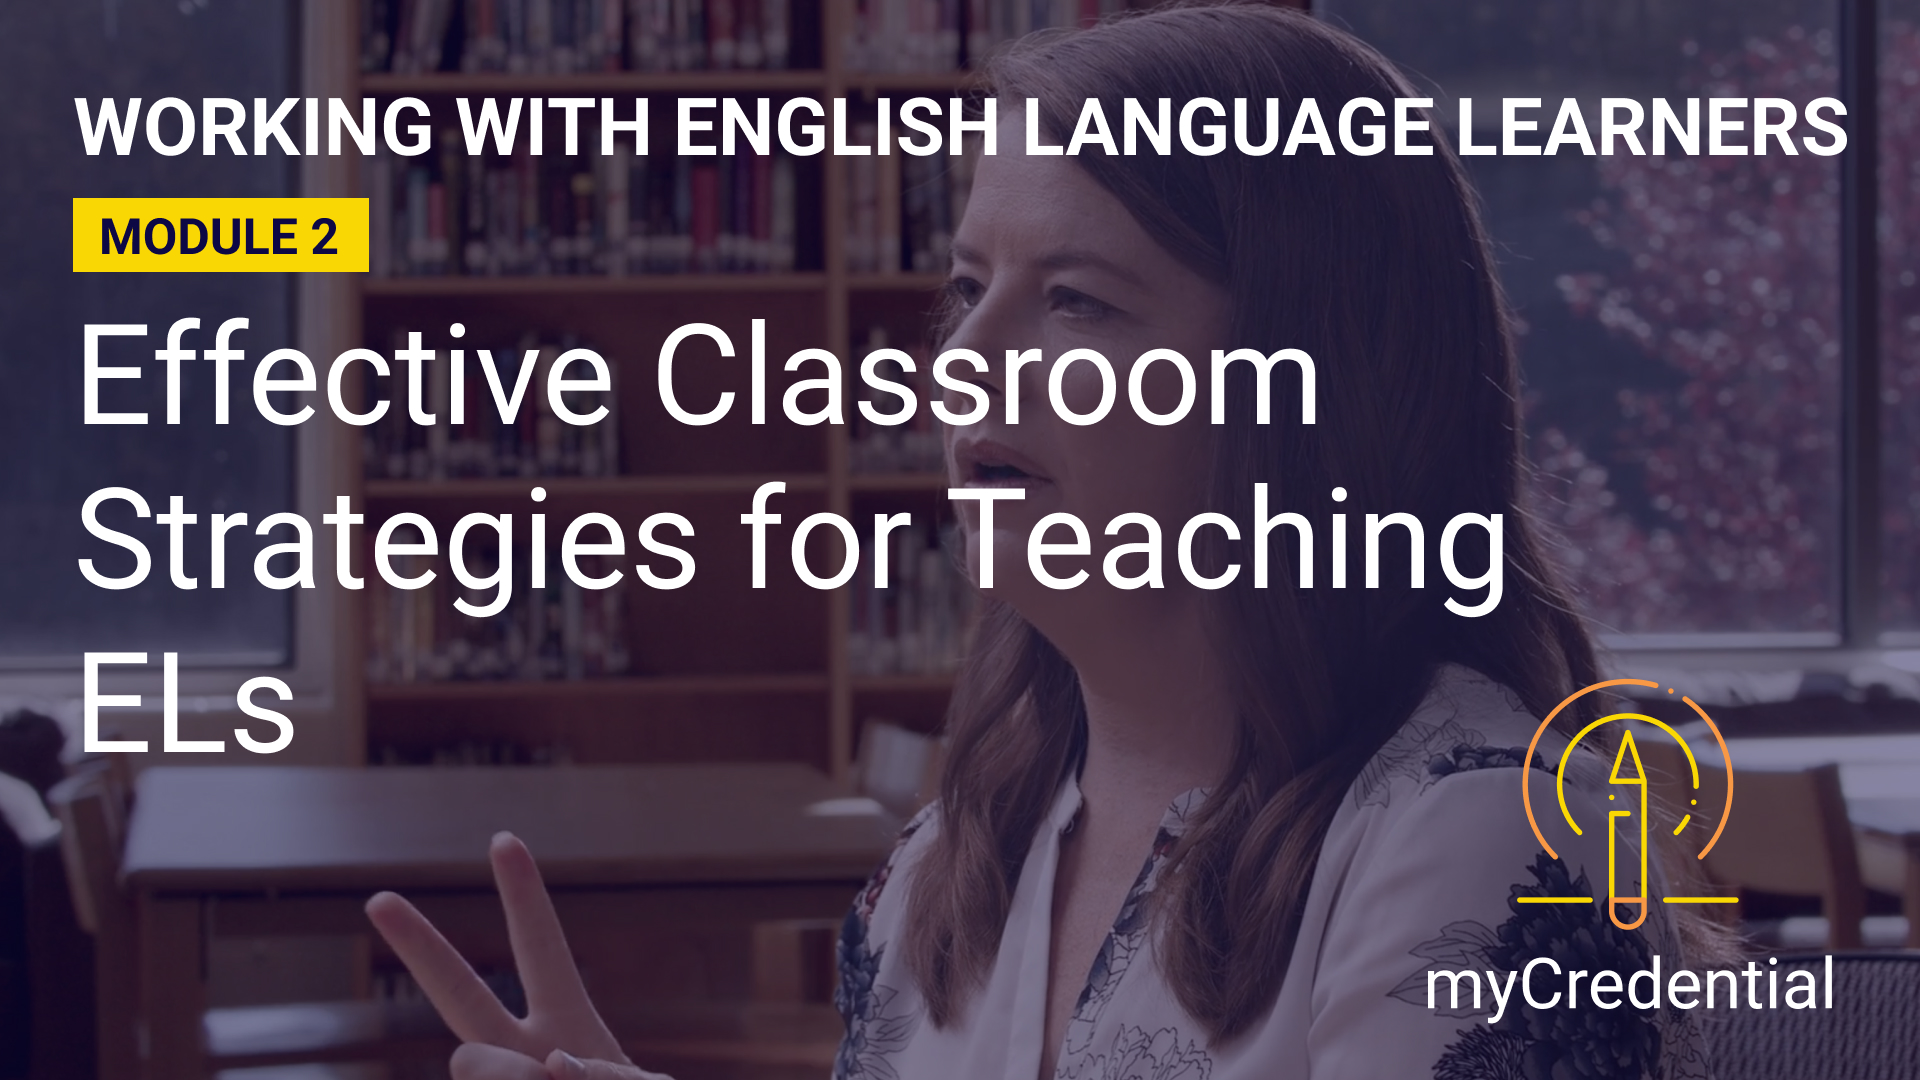 Working with English Language Learners (Unit 2): Effective Classroom Strategies for Teaching ELs